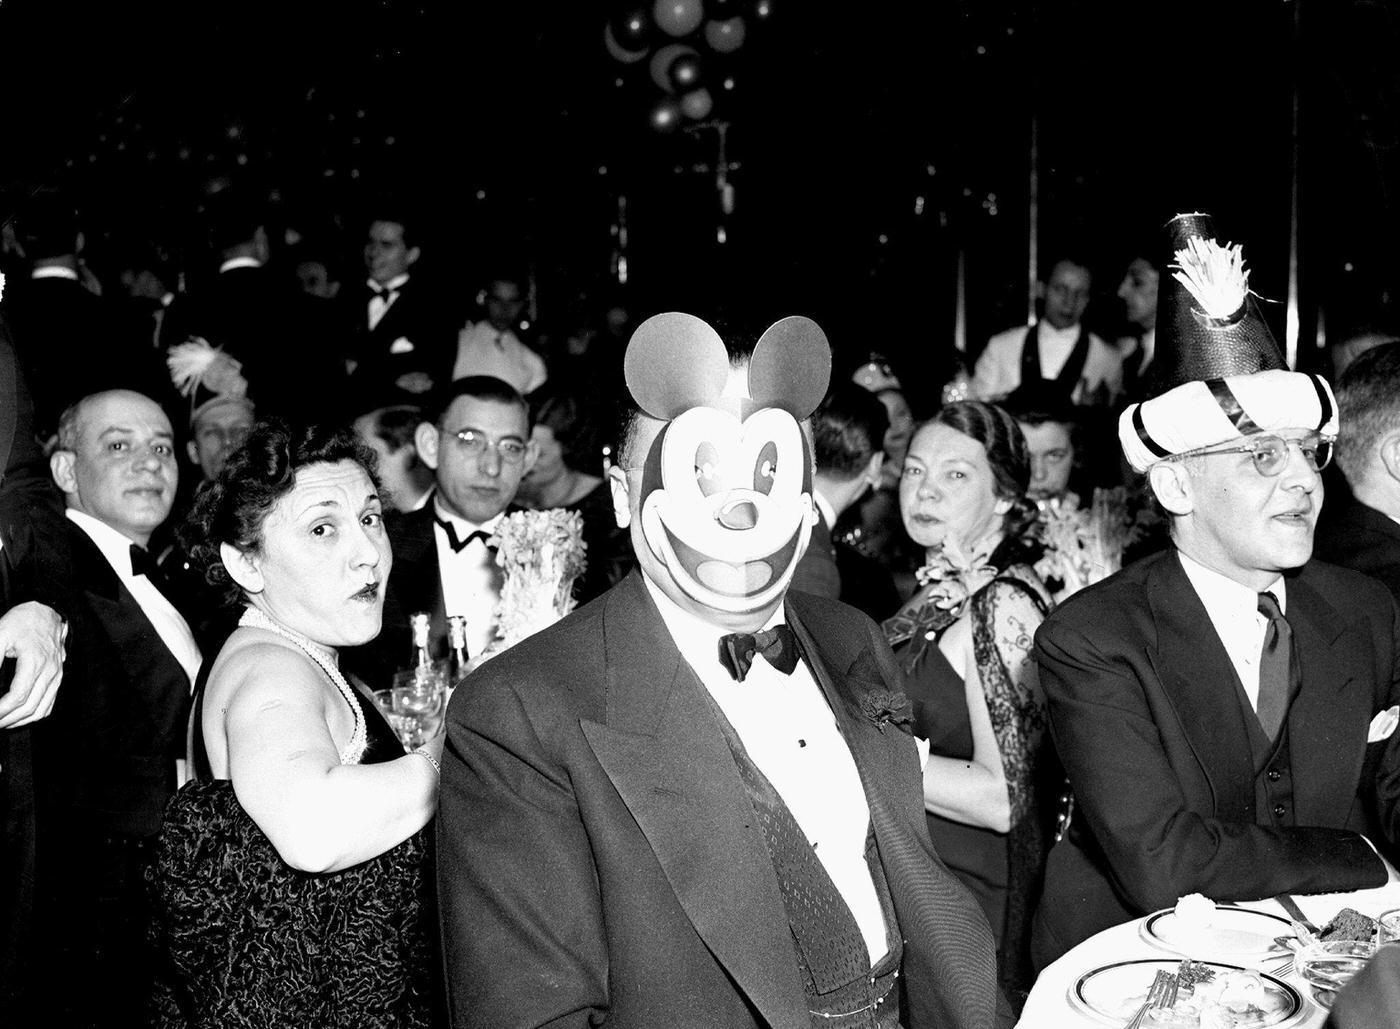 FBI director J. Edgar Hoover wearing Mickey Mouse mask at New Year's Eve party.